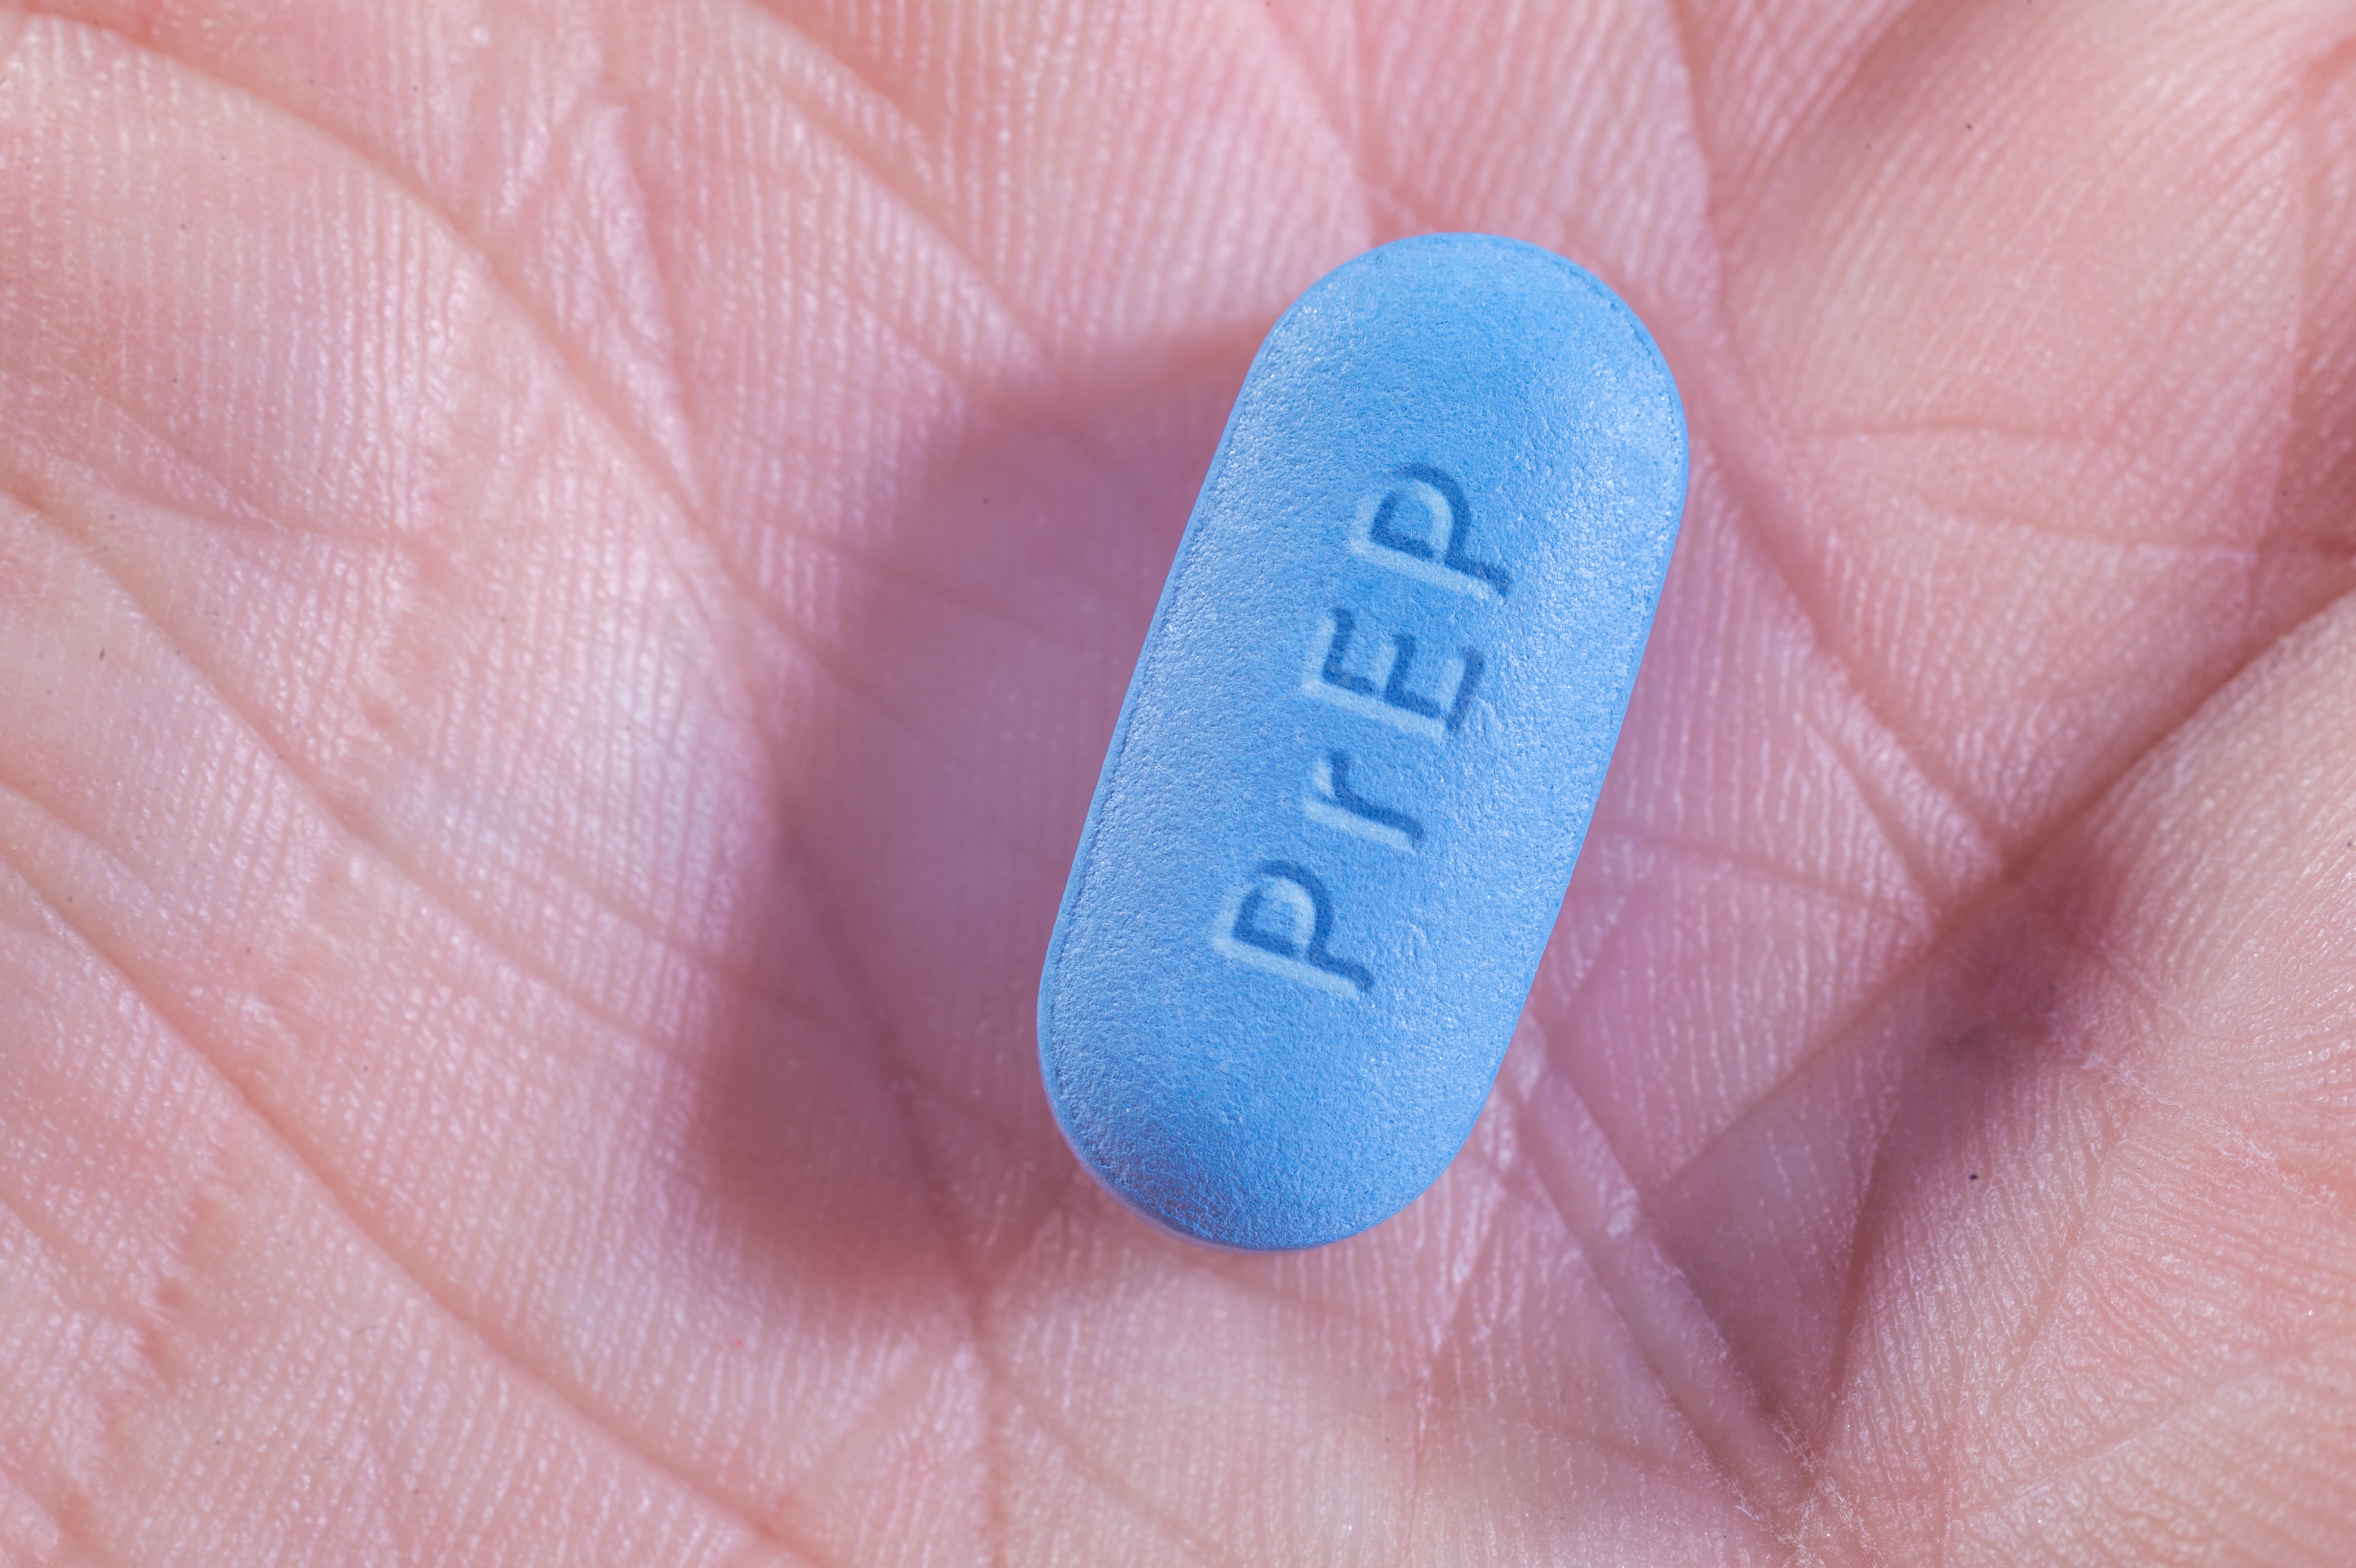 Victorian AIDS Council announces $100,000 in funding for PrEP trial